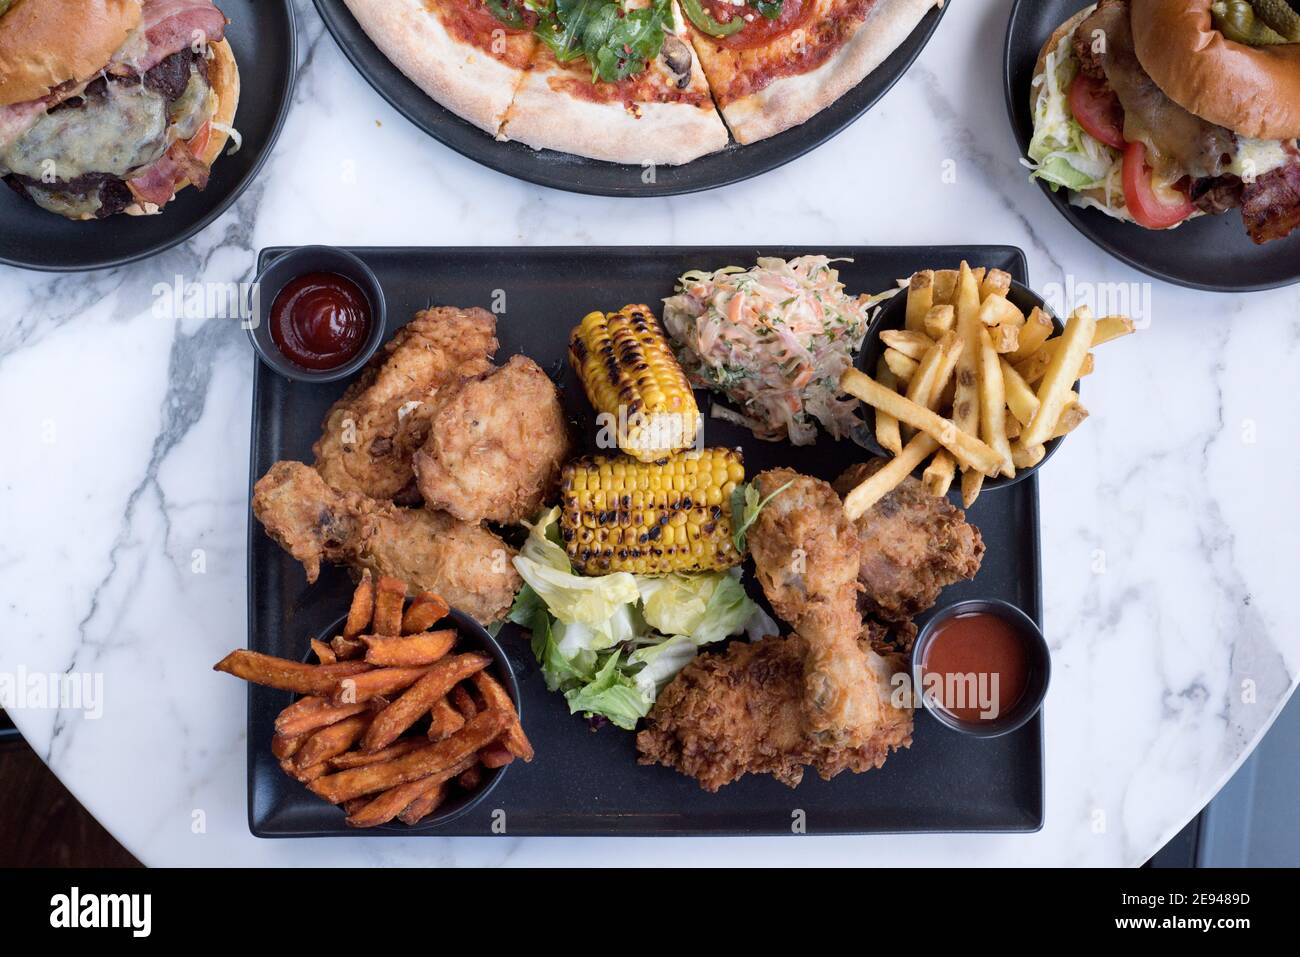 Sheffield, UK - 03 Aug 2017: Southern fried chicken and fries, pizza and burgers American diner food at OHM, Fitzwilliam Street Stock Photo